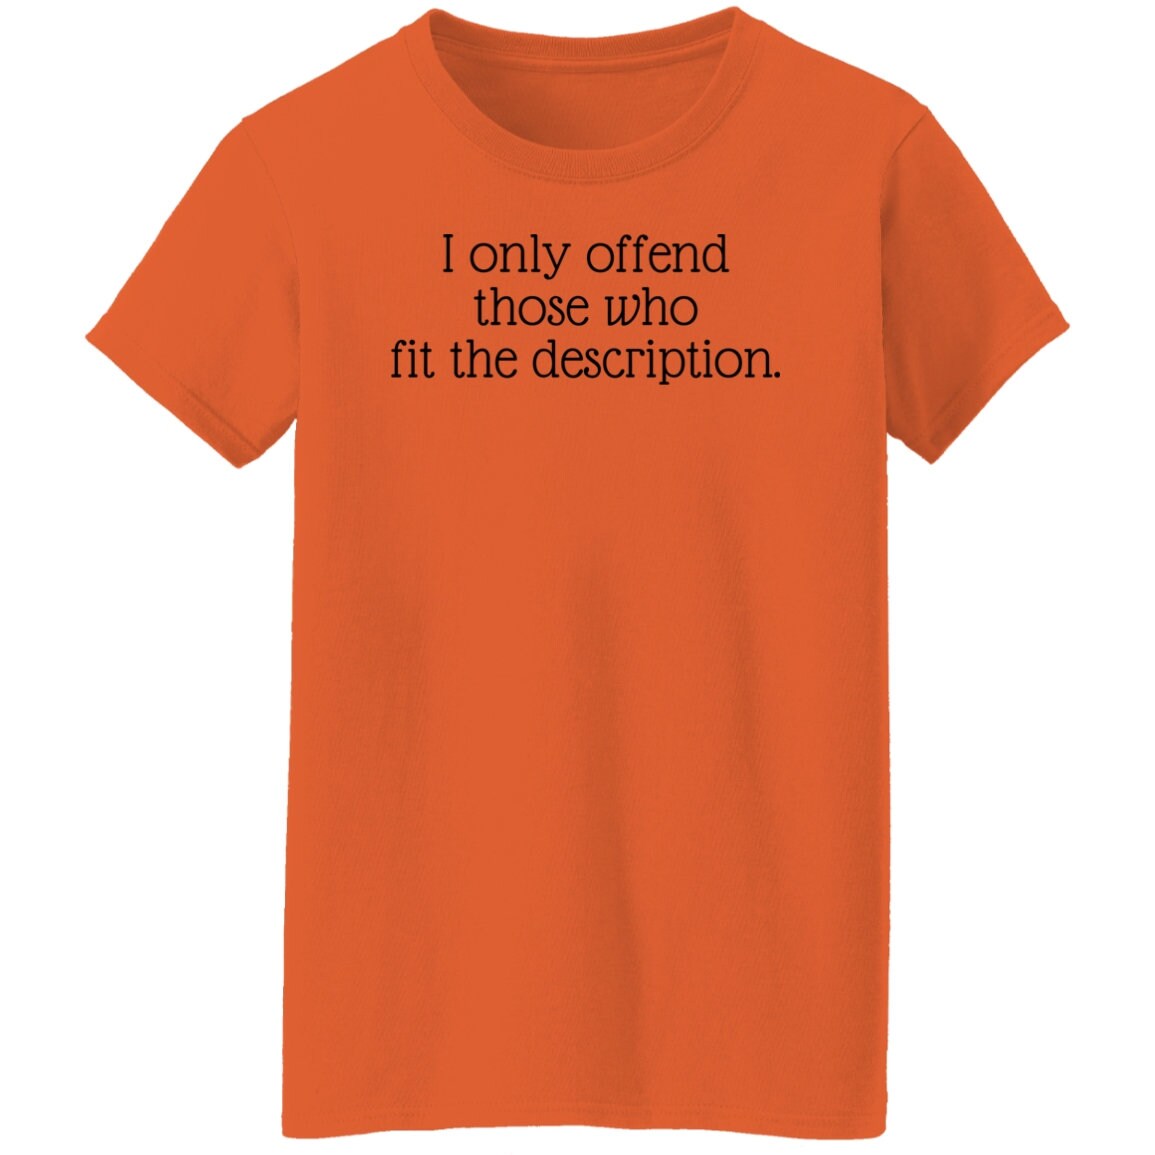 I only offend those who fit the description T-Shirt